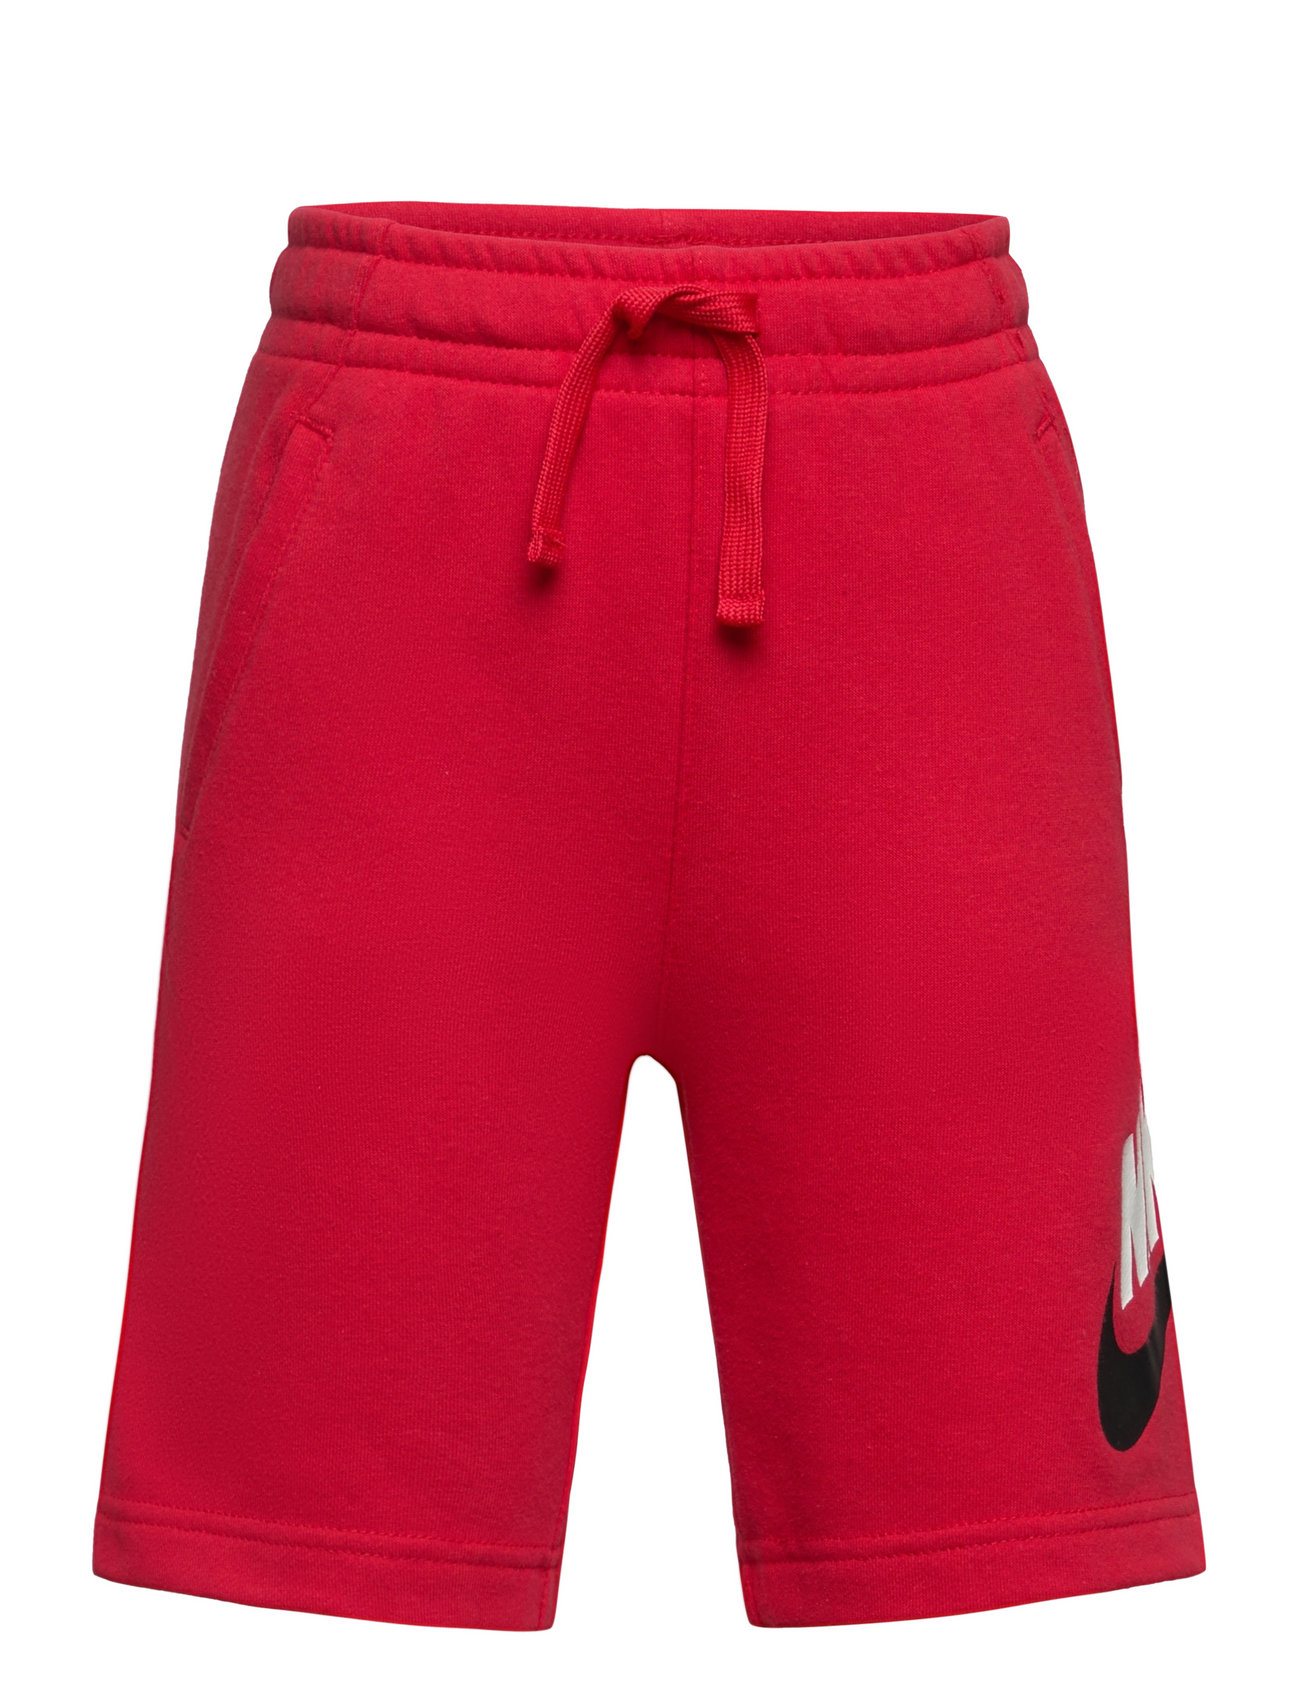 Nkb Club Hbr Ft Short / Nkb Club Hbr Ft Short Sport Shorts Red Nike